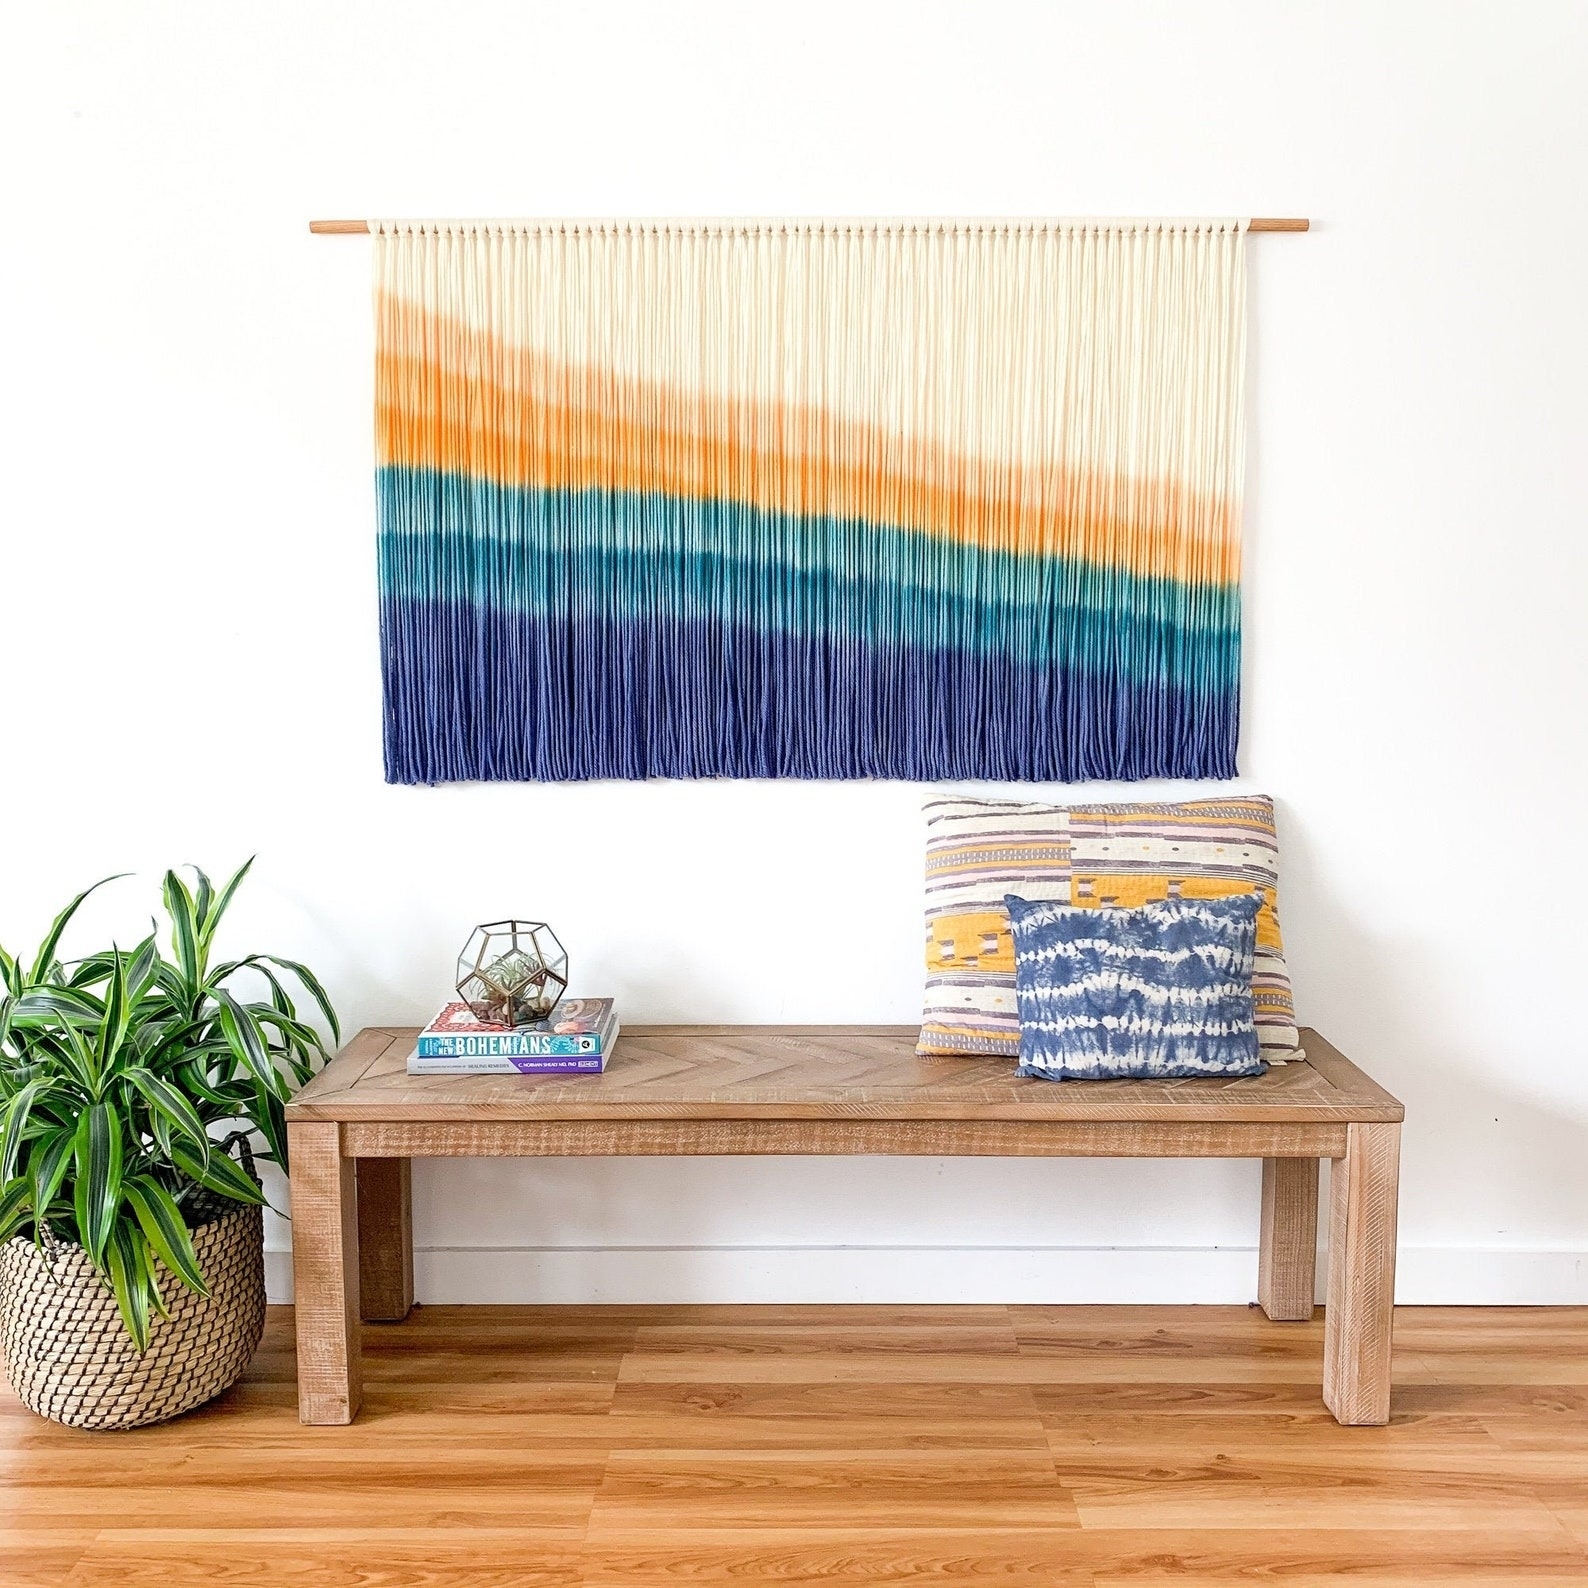 the large yellow, orange, and blue, macrame hanging above a bench